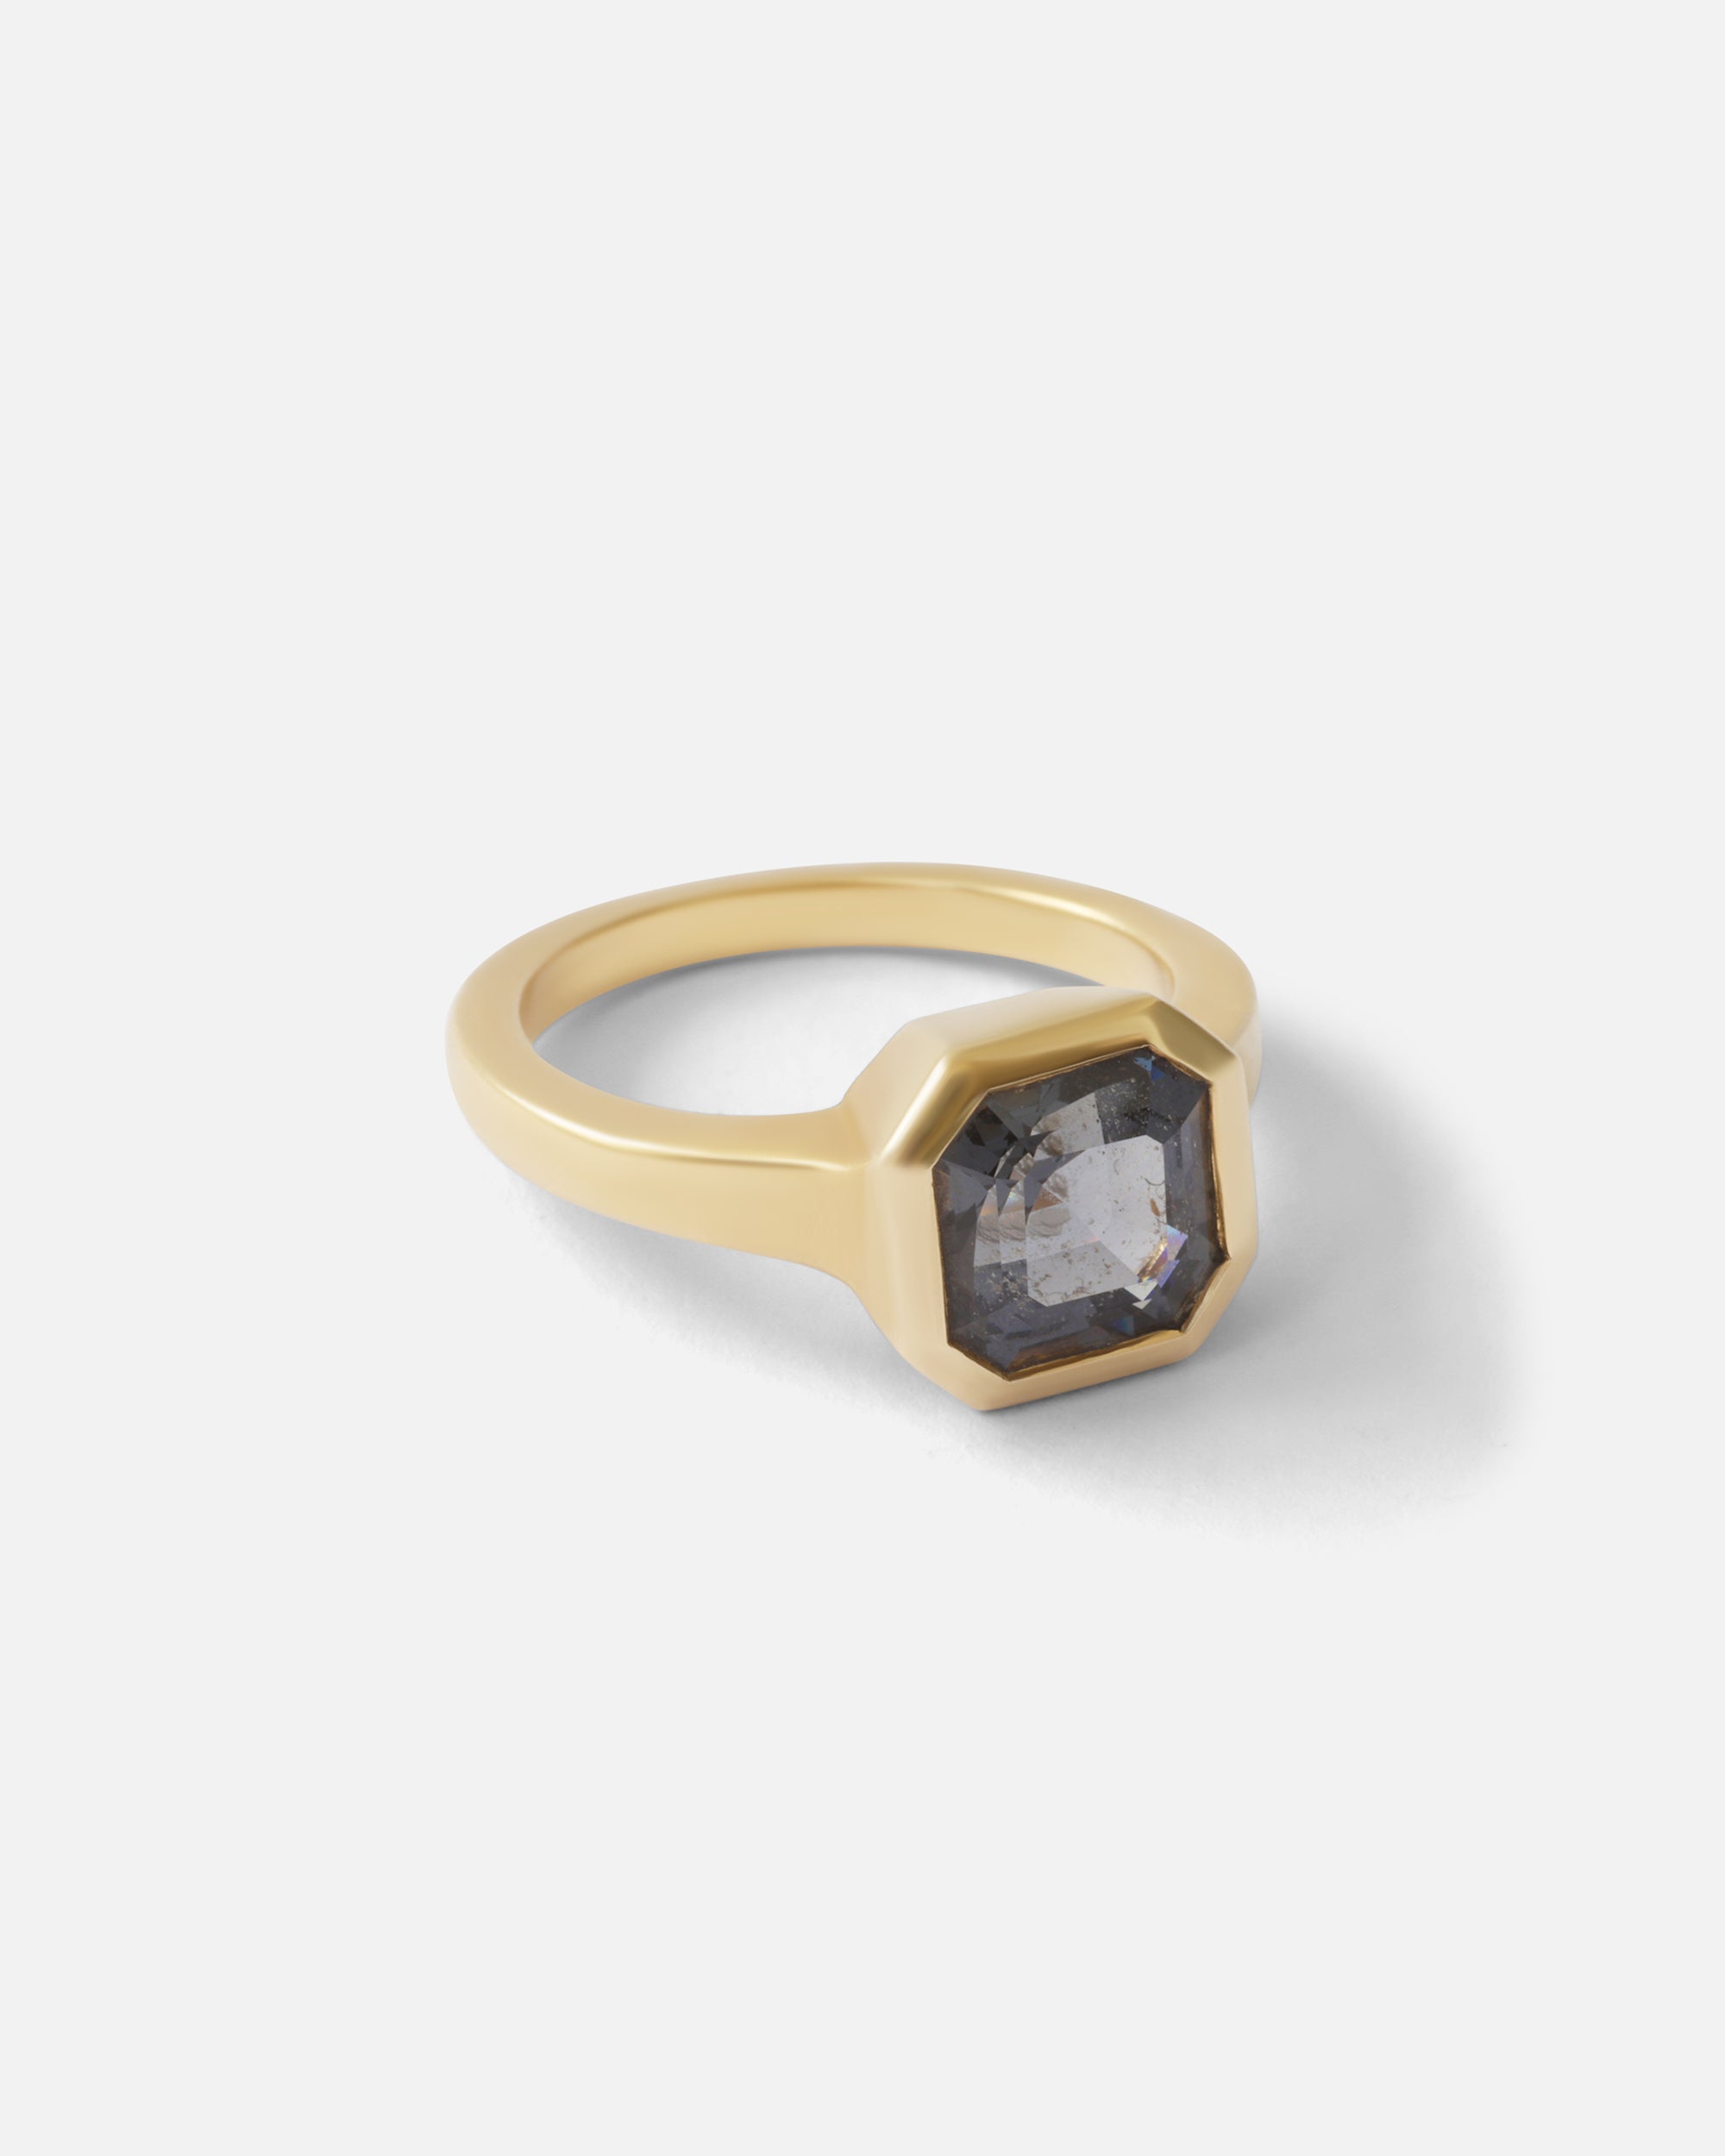 Grey Spinel Ring By Bree Altman